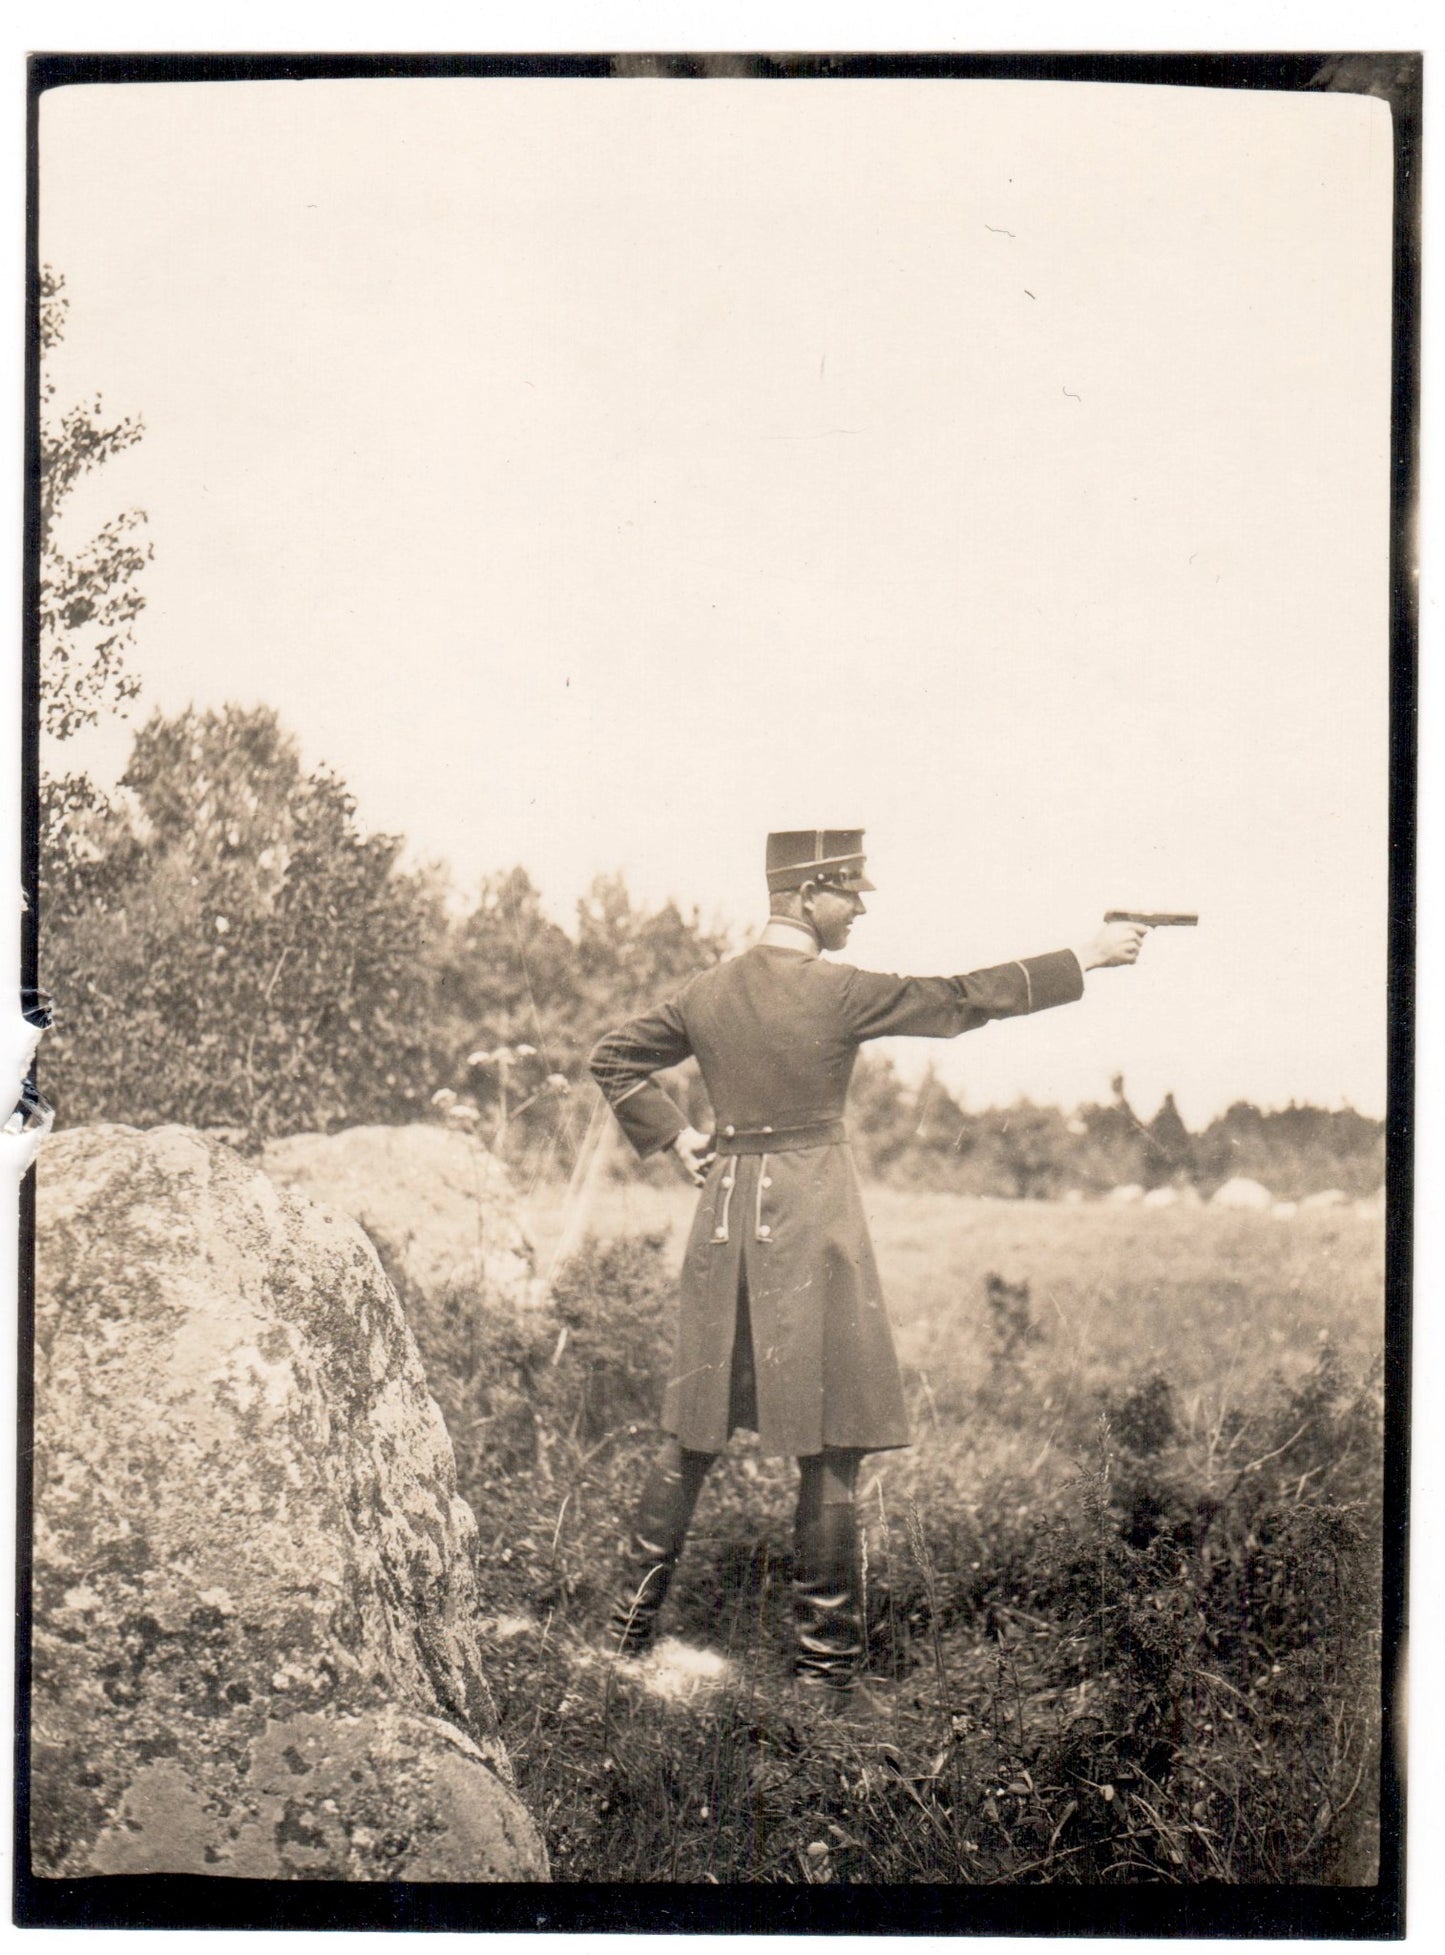 Vintage Photography - A Soldier with a Pistol - Military Photo - An Officer